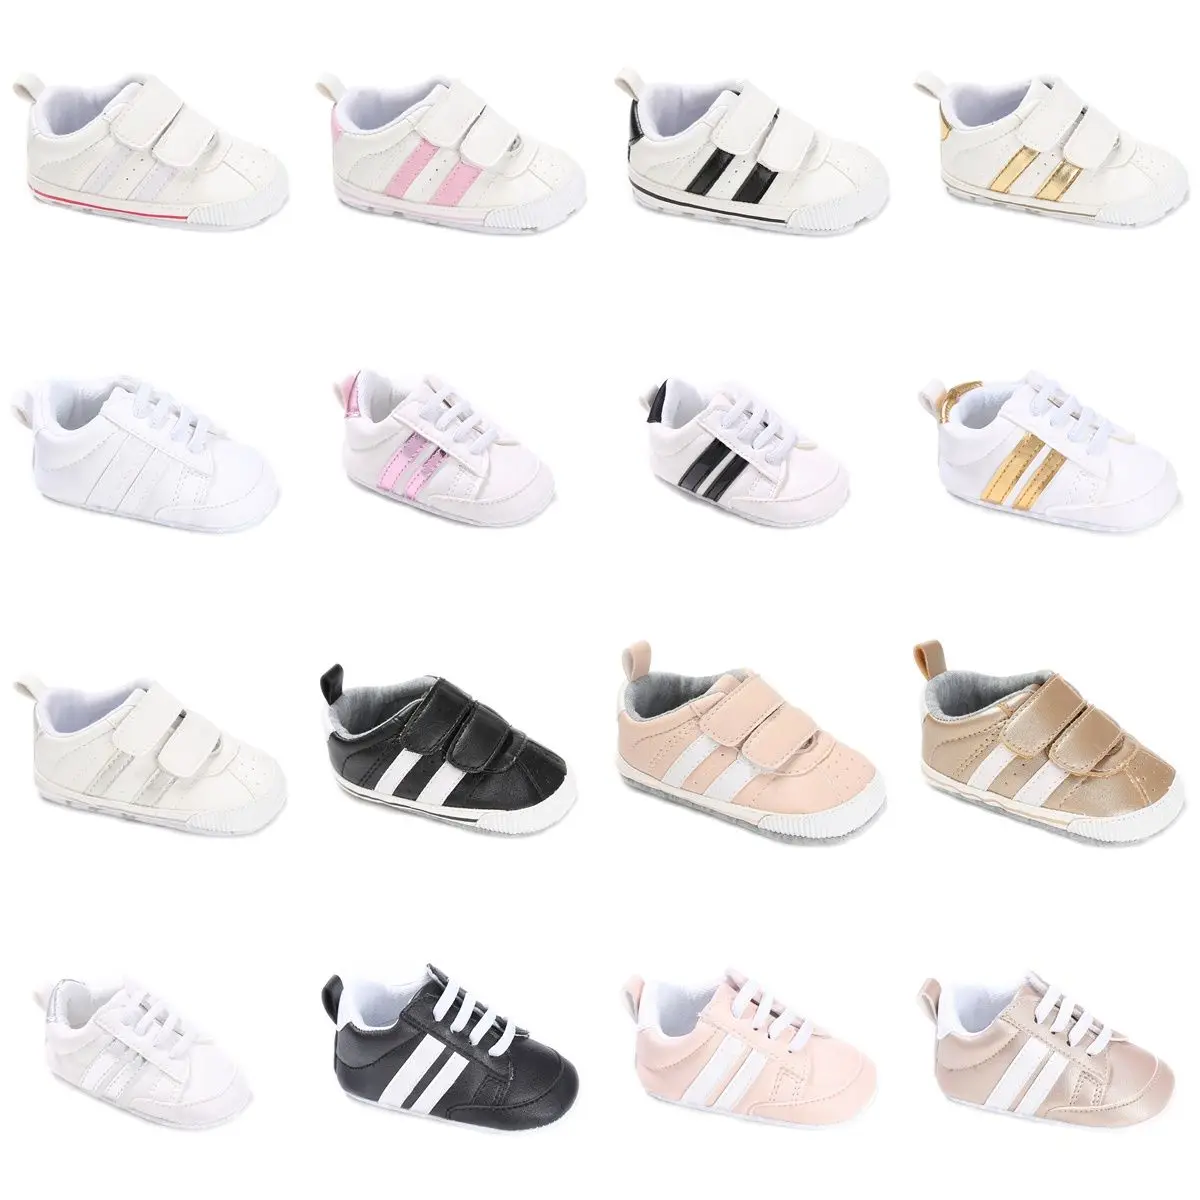 Toddler First Walker Baby Shoes Boys Girls Classic Sports Soft Sole PU Leather Multicolor Crib Baby Moccasin Sneakers